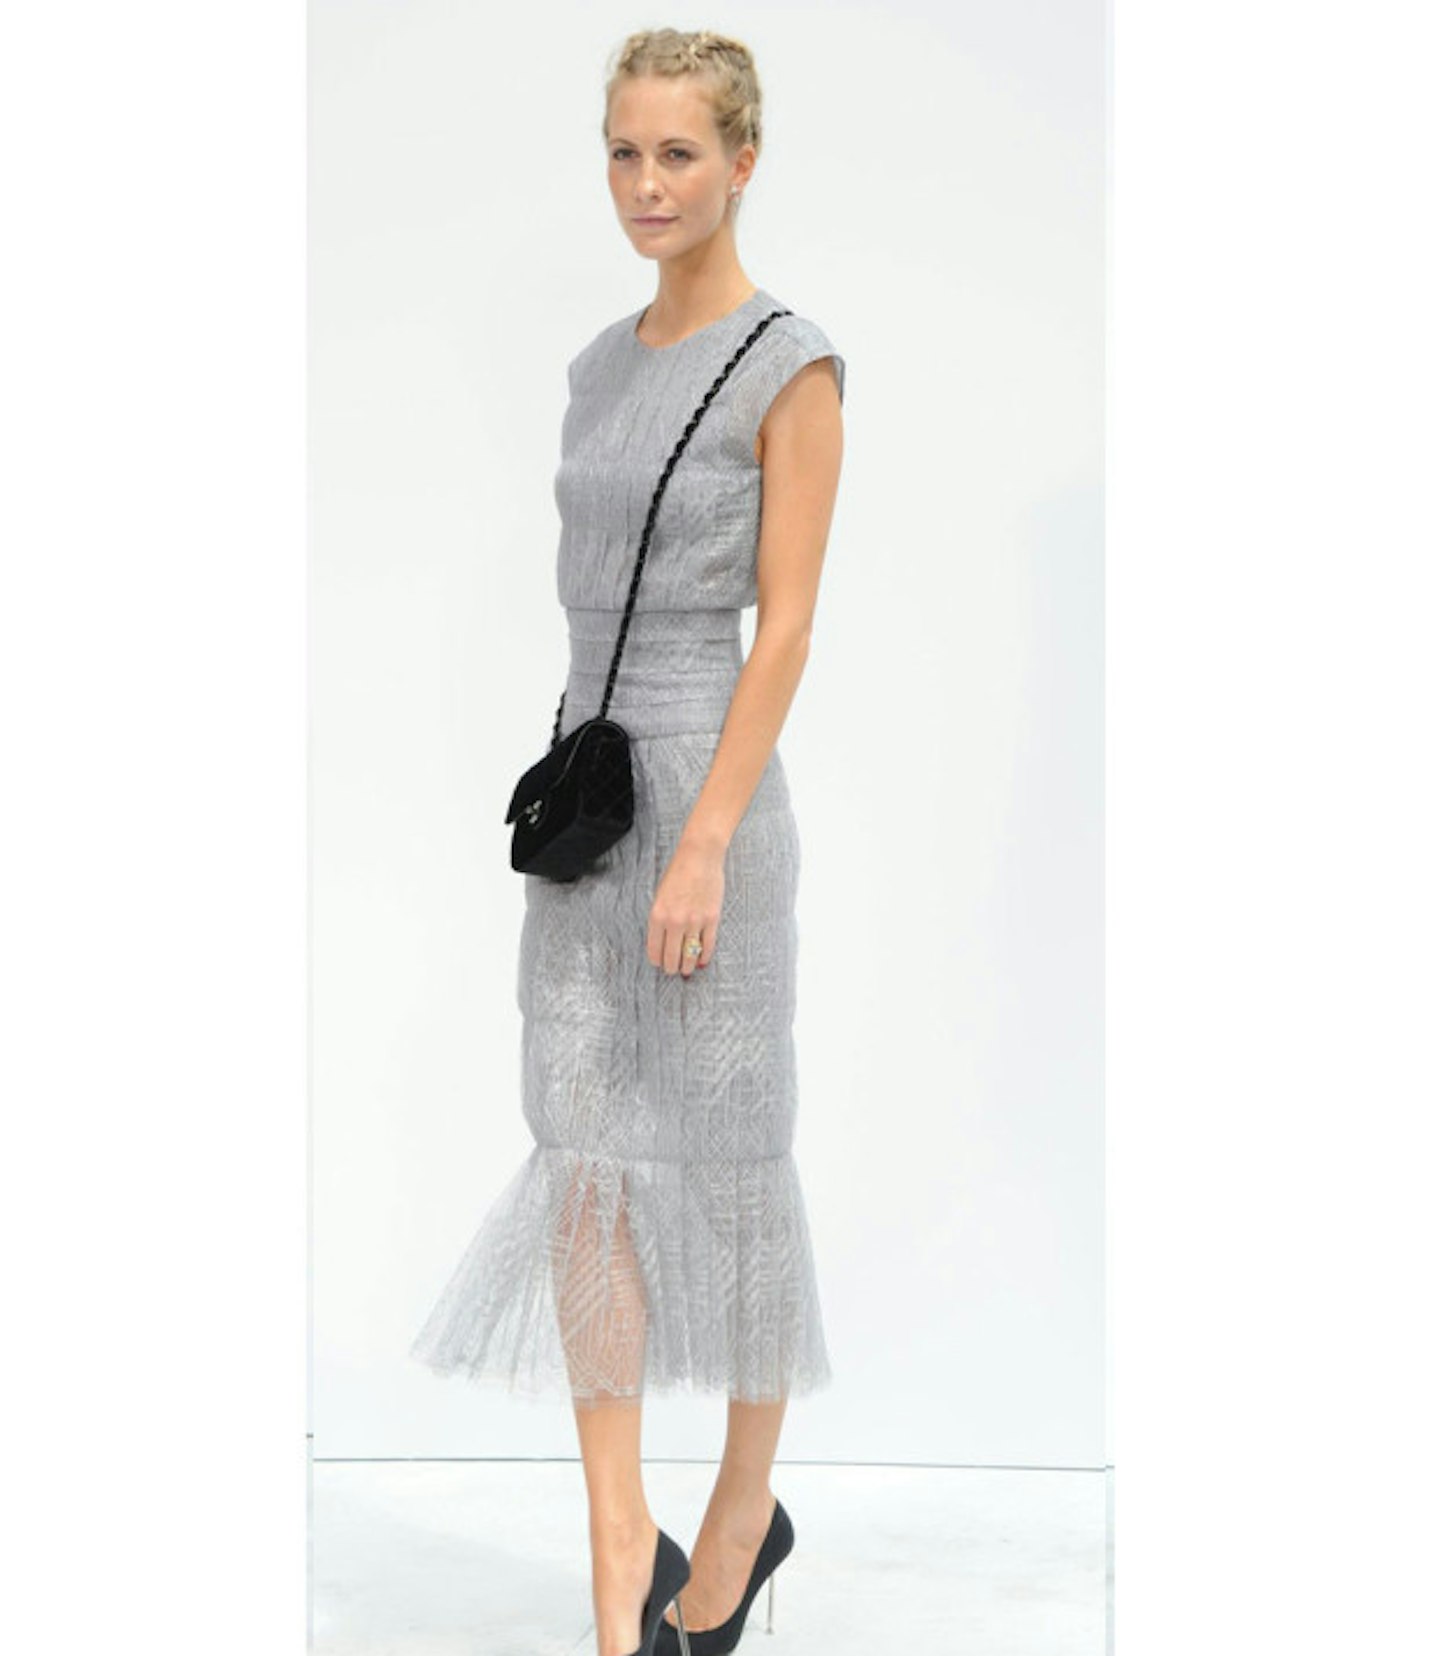 poppy-delevingne-chanel-couture-show-aw-14-grey-fringe-dress